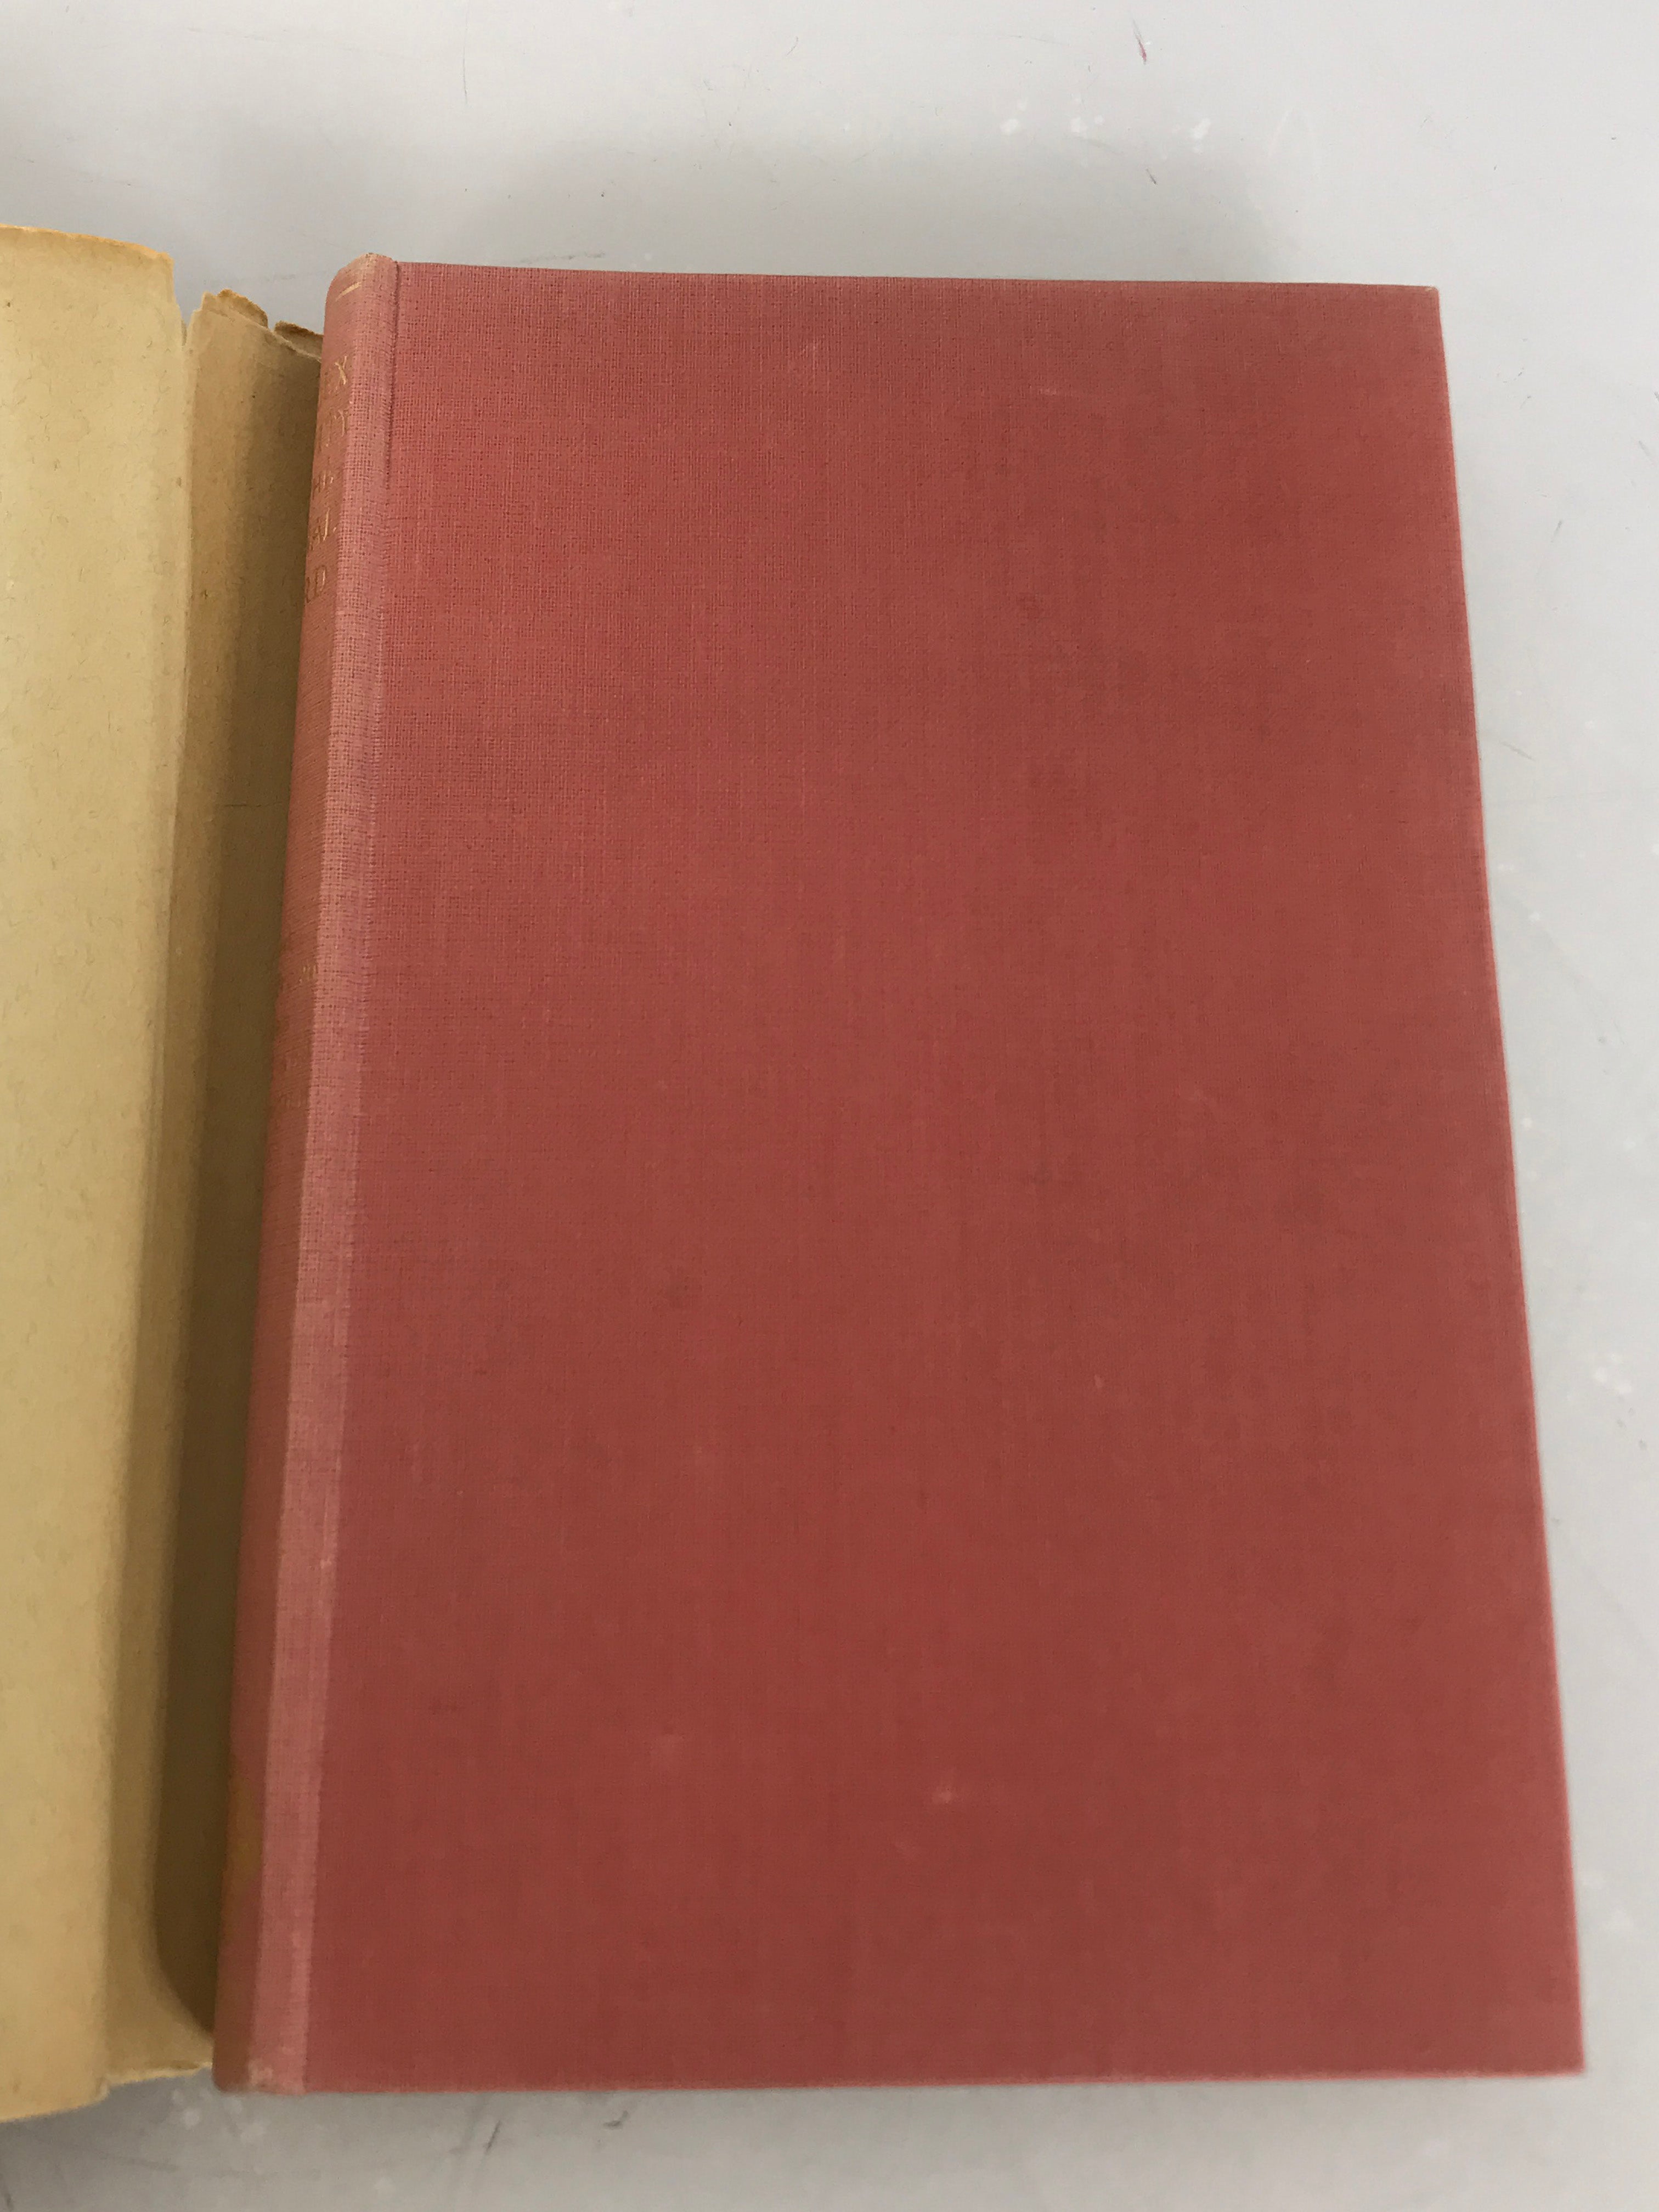 Reflex Activity of the Spinal Cord by Creed, Denny-Brown, Eccles, Liddell, and Sherrington 1938 HC DJ